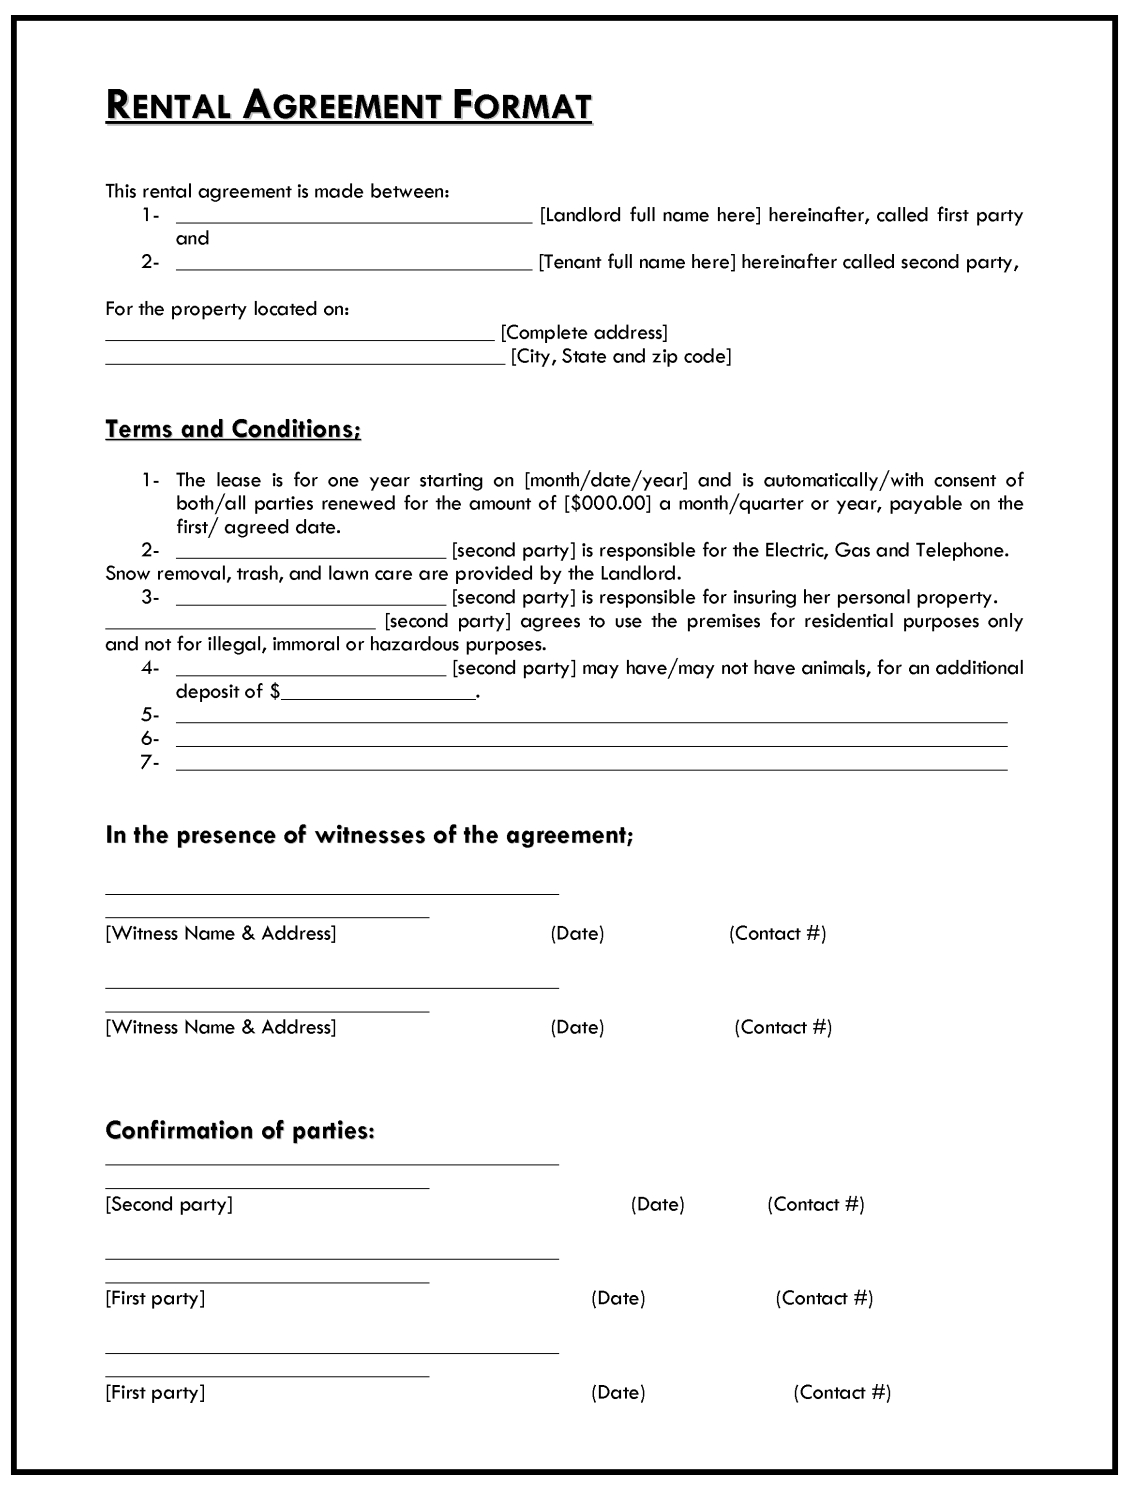 Rental Agreement Example Rental Agreement Format Template